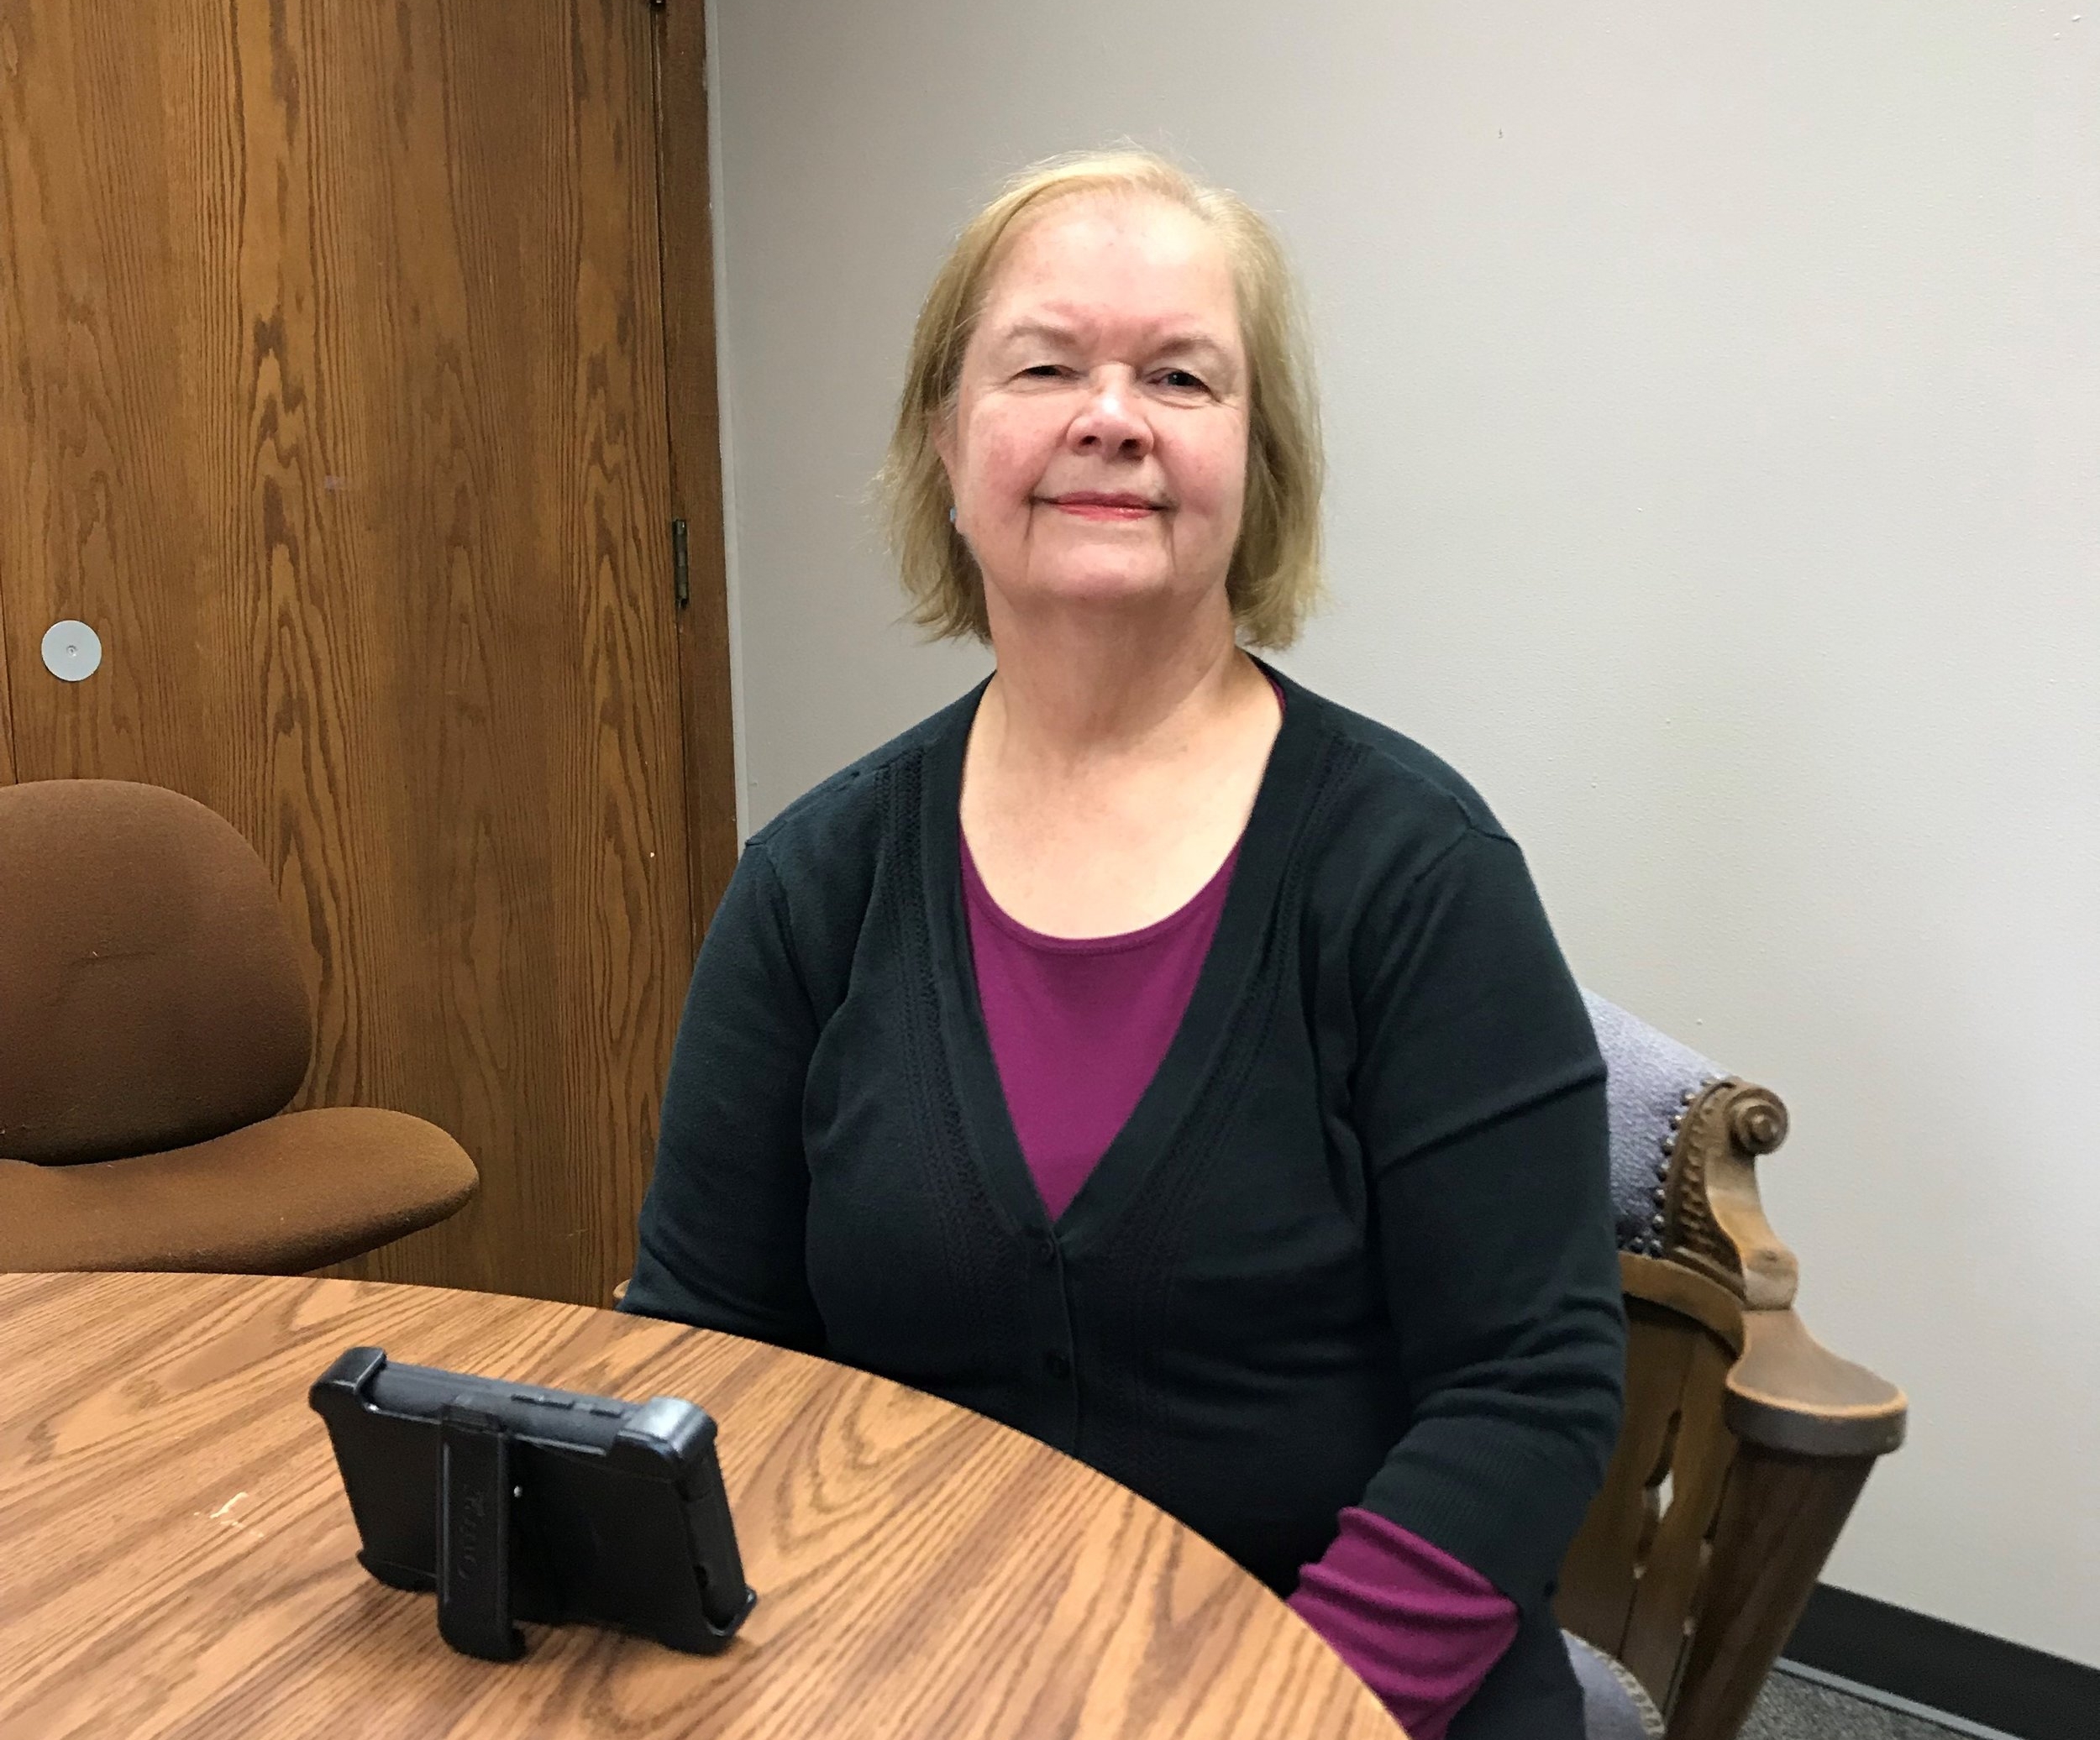  “I volunteer because of the opportunity to work with other people, both to pay forward the help I've received in my life and to keep growing. I'm grateful to the Stoughton Area Senior Center for accepting my volunteer application and allowing me to 